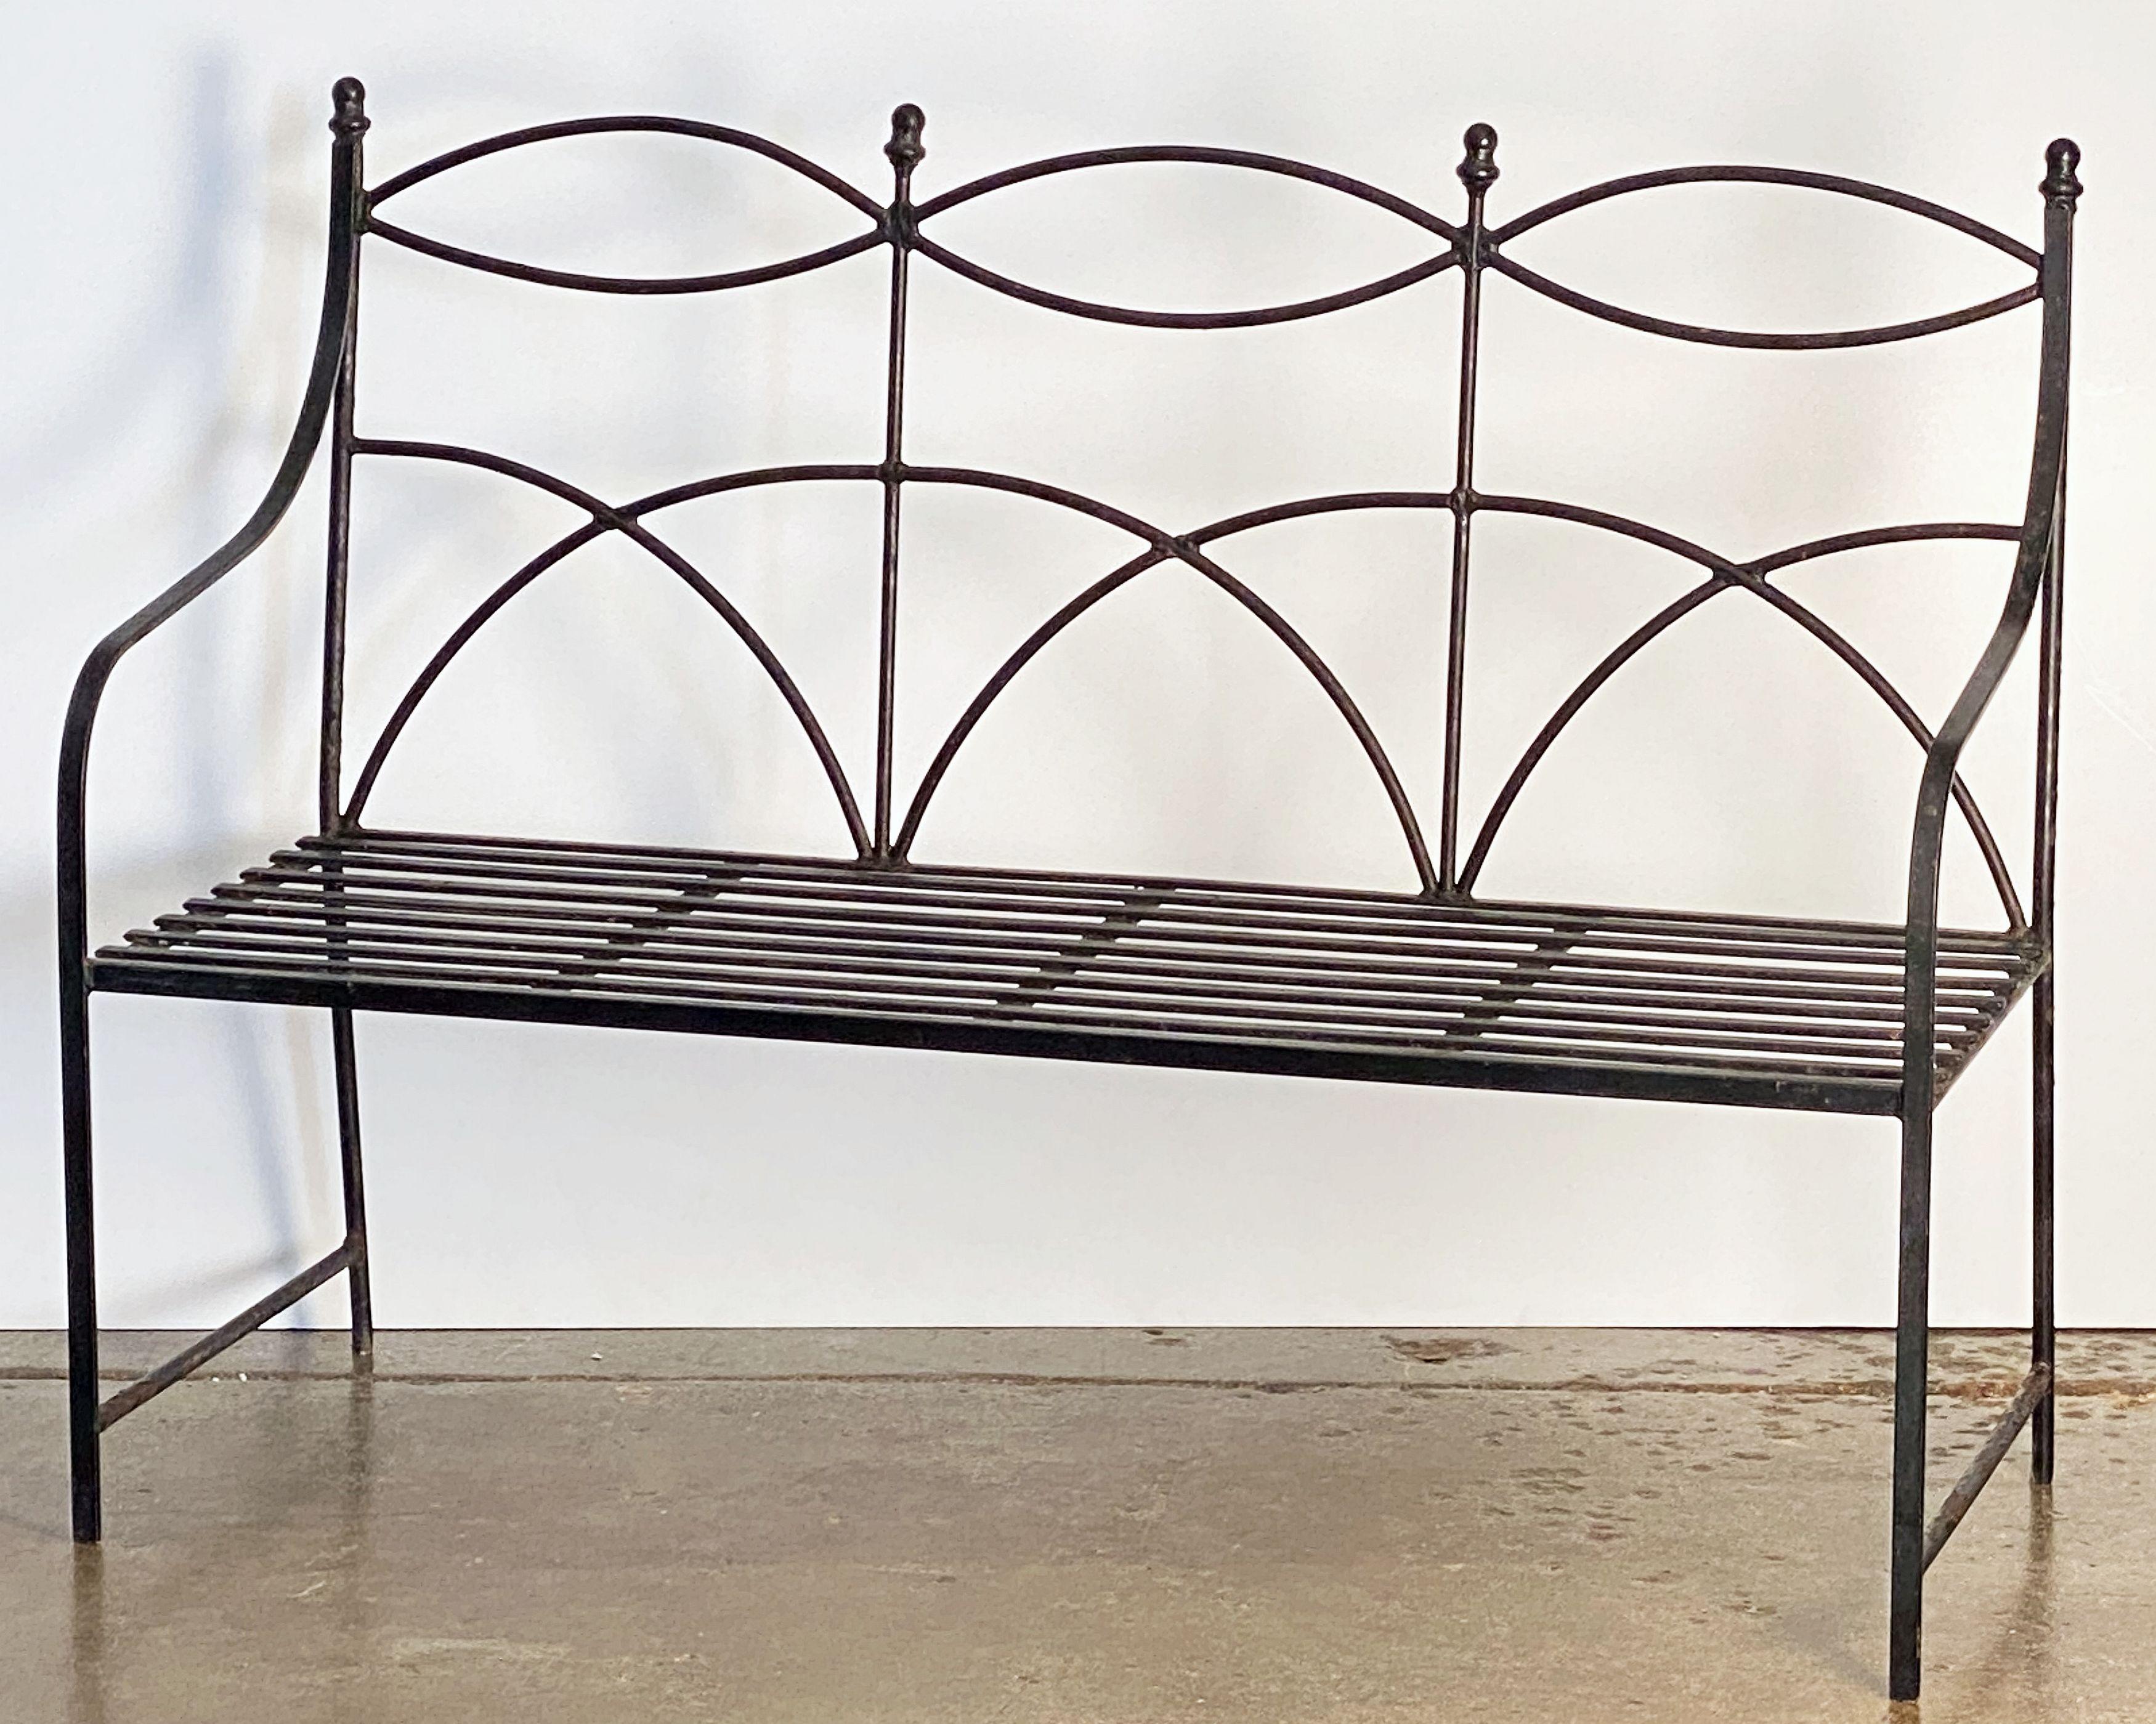 A fine English garden seating bench (or garden seat) of painted iron, featuring a comfortable back and seat with a graceful curvature and serpentine arms, with decorative finials, and set upon four legs.

Perfect for an indoor or outdoor garden,